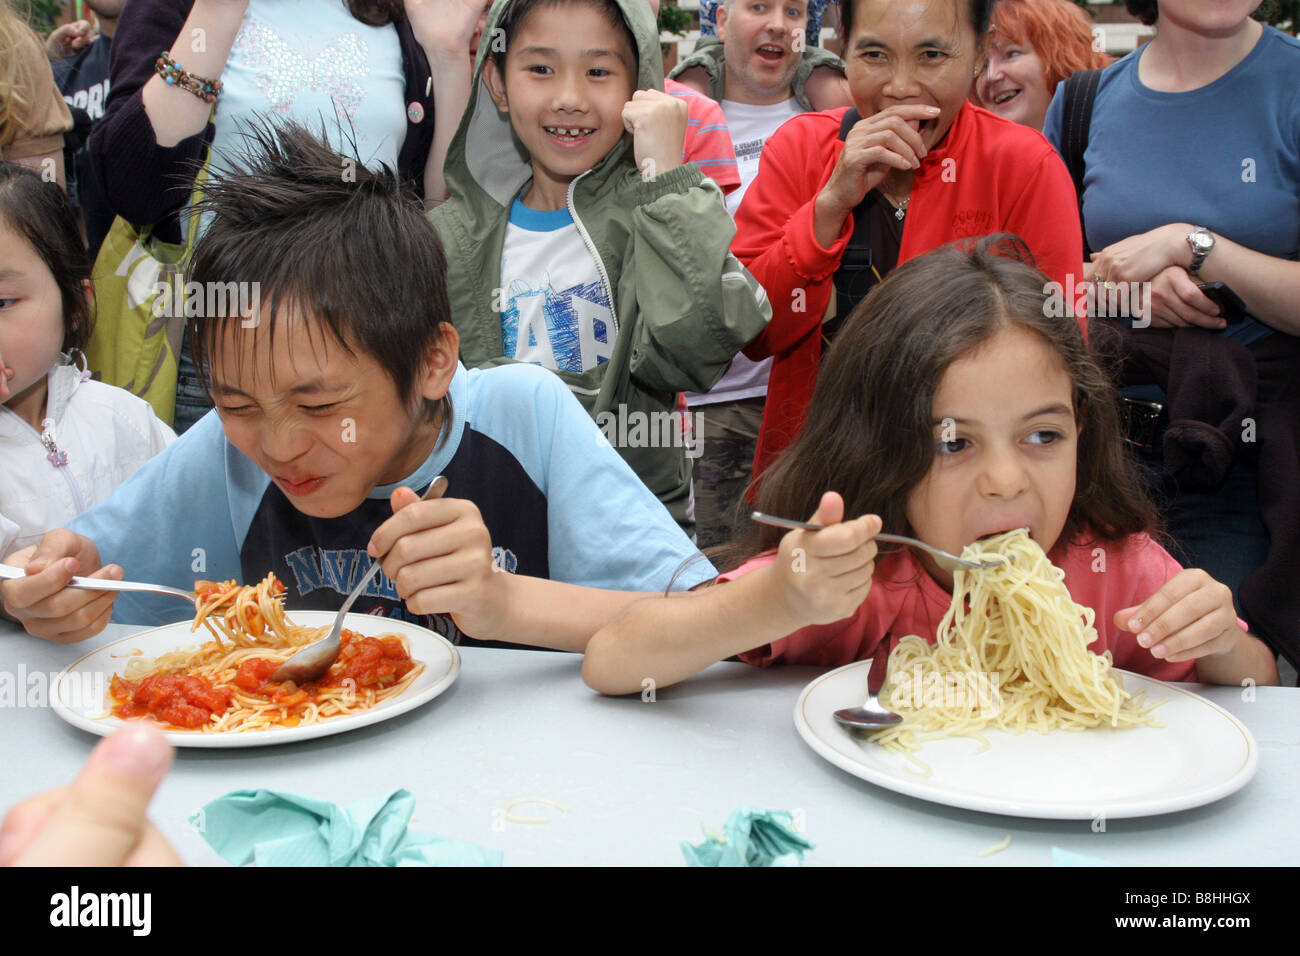 Children take part in a spaghetti eating contest Stock Photo